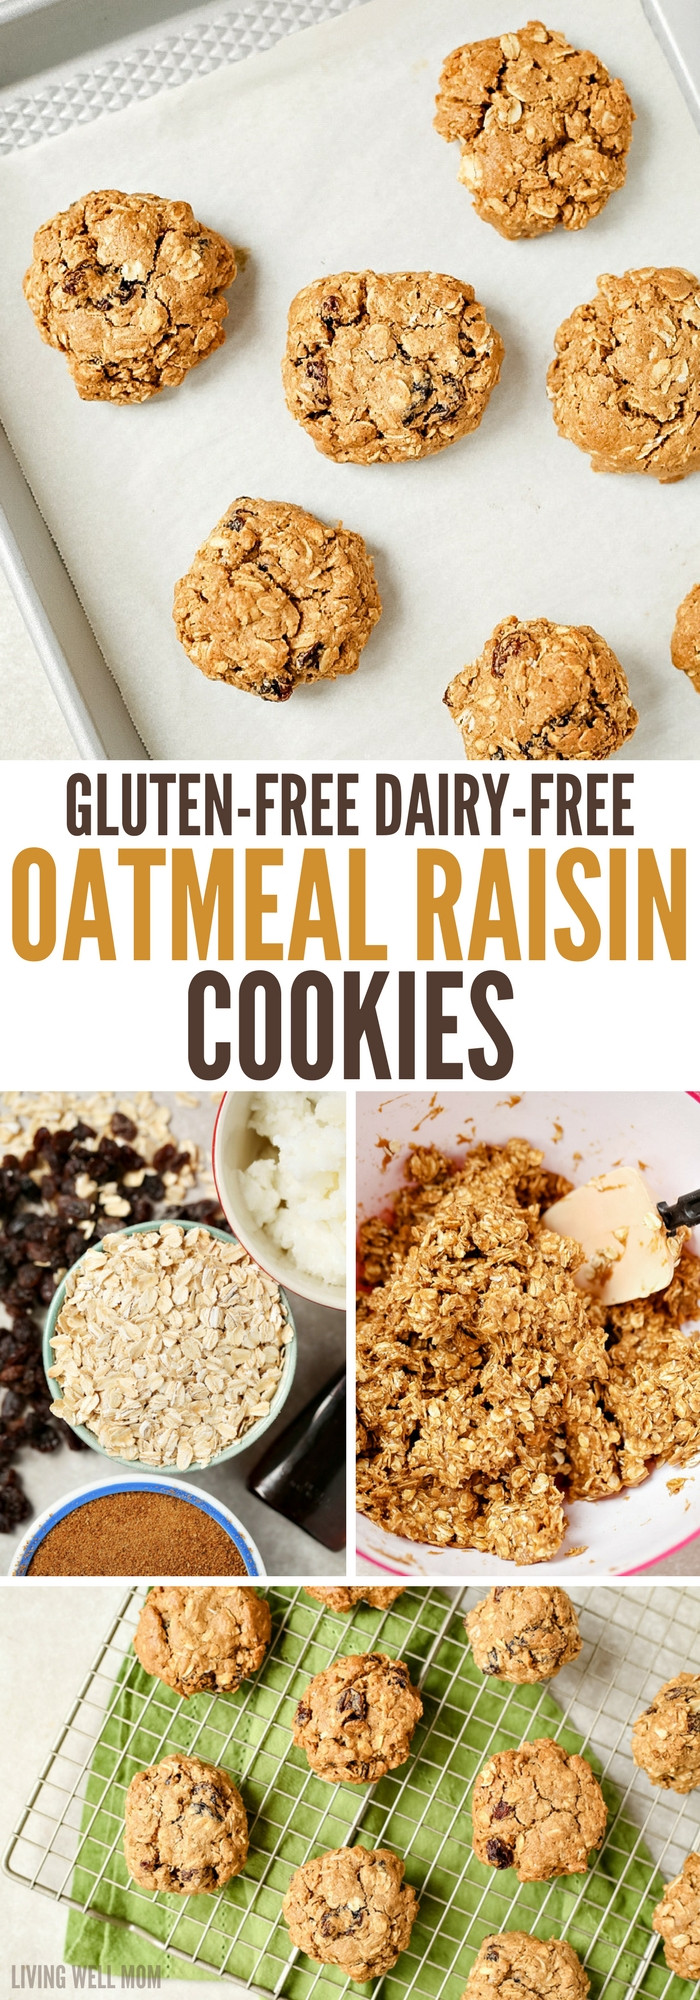 Gluten And Dairy Free Cookie Recipes
 Gluten Free Dairy Free Oatmeal Raisin Cookies